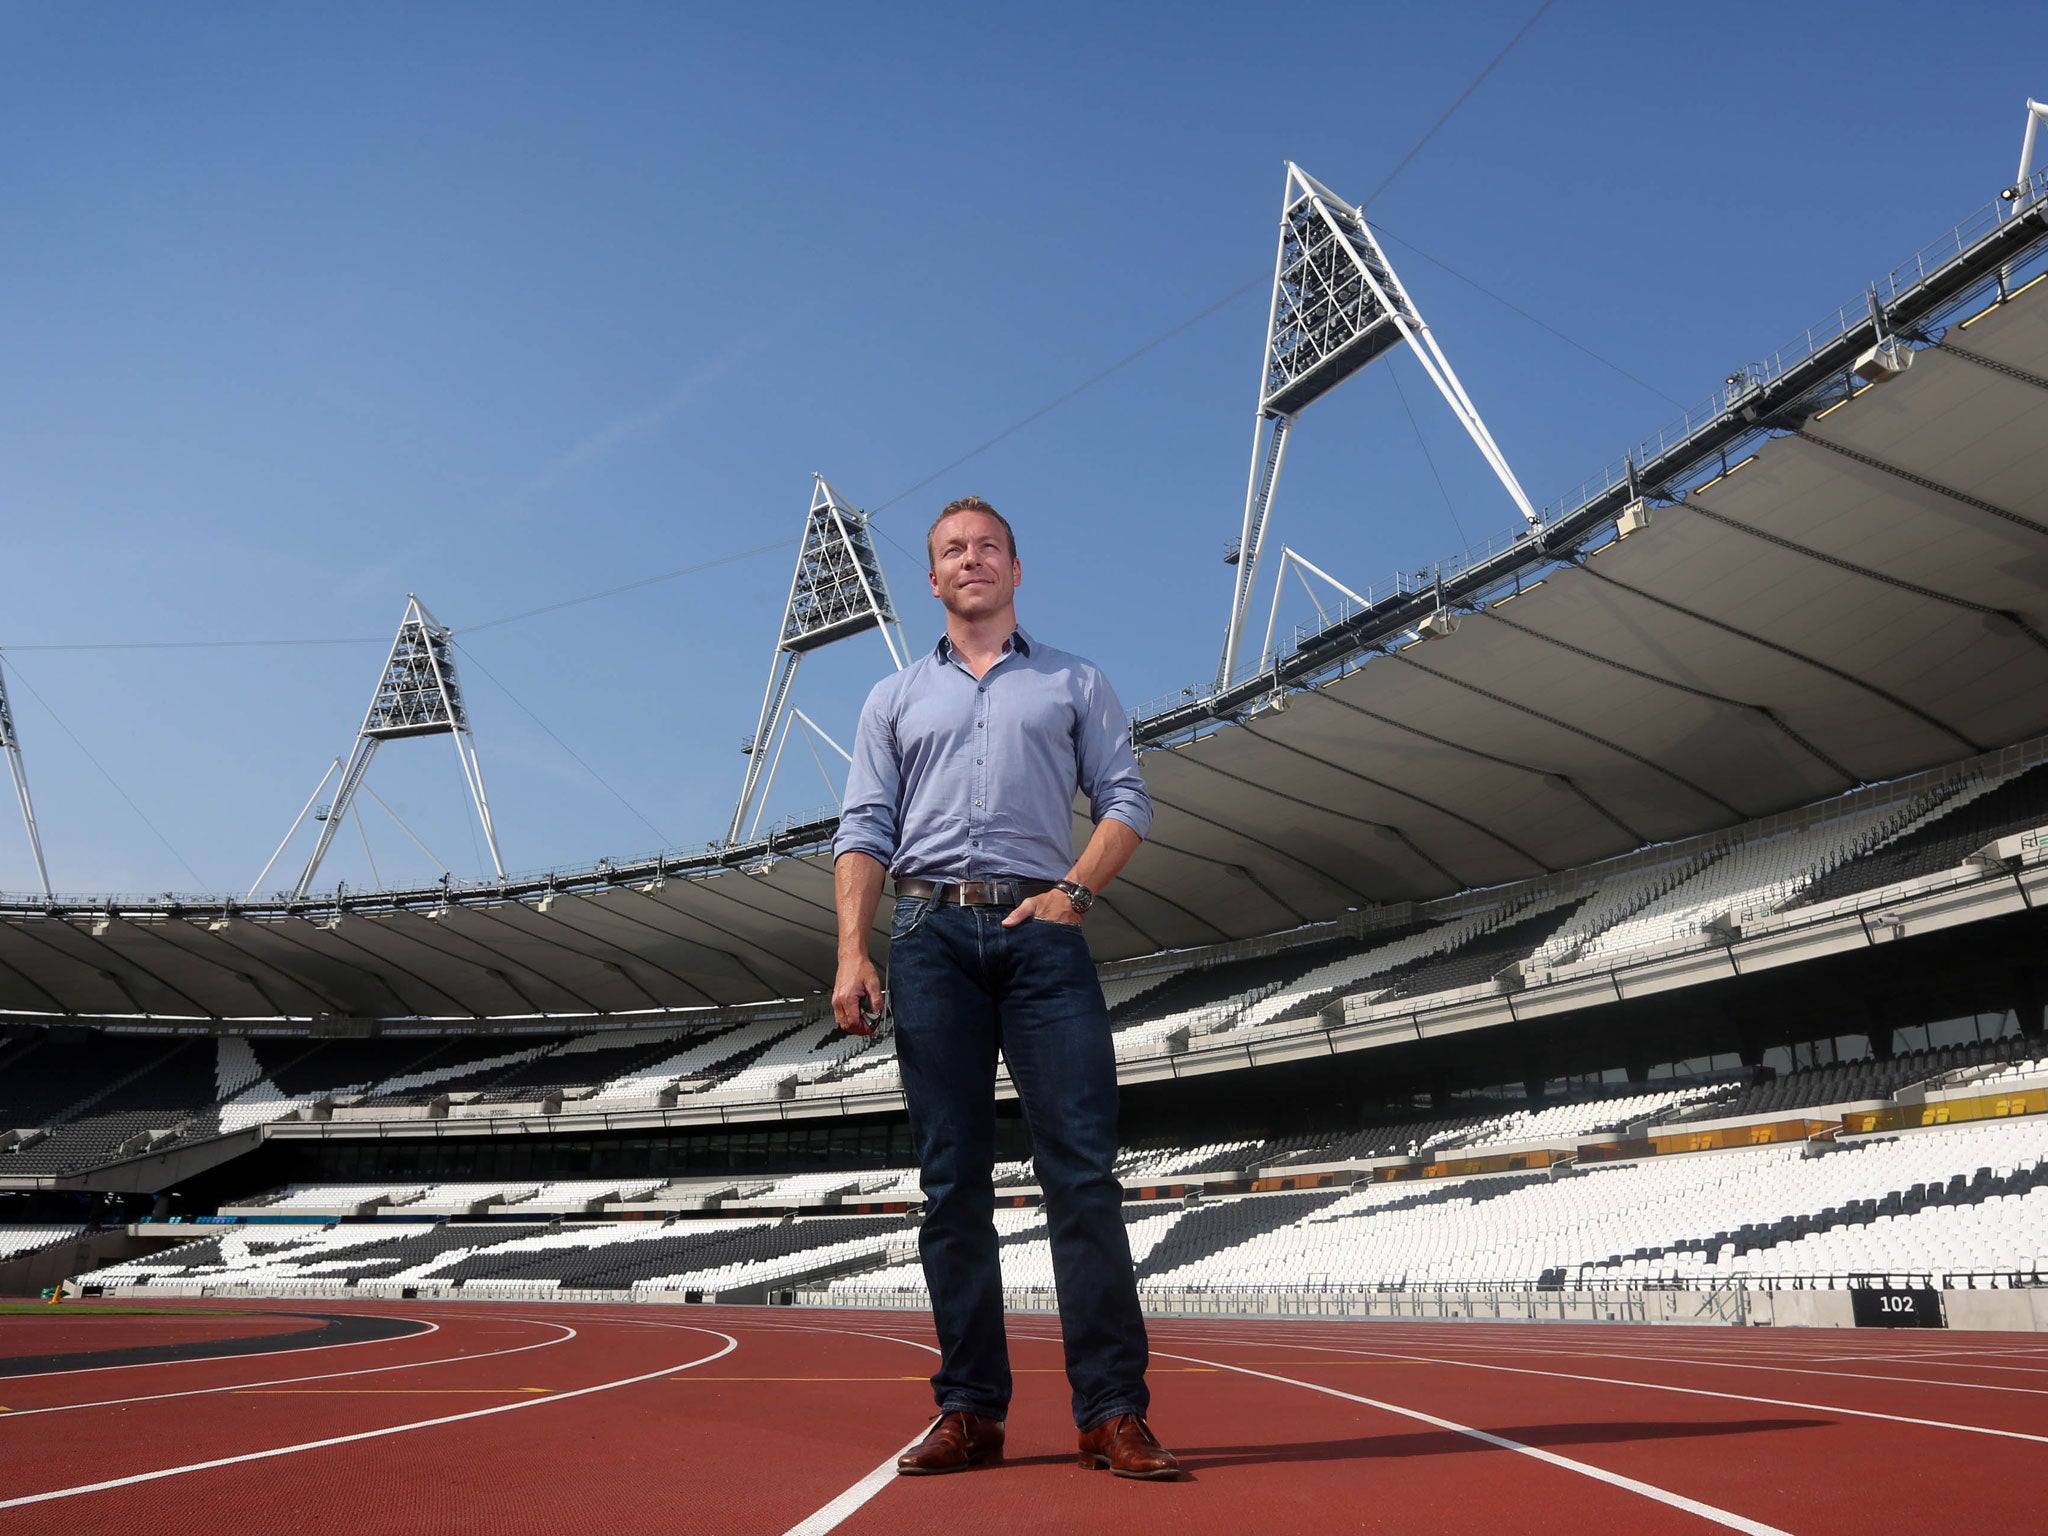 Sir Chris Hoy visiting the Olympic Stadium for the first time since London 2012